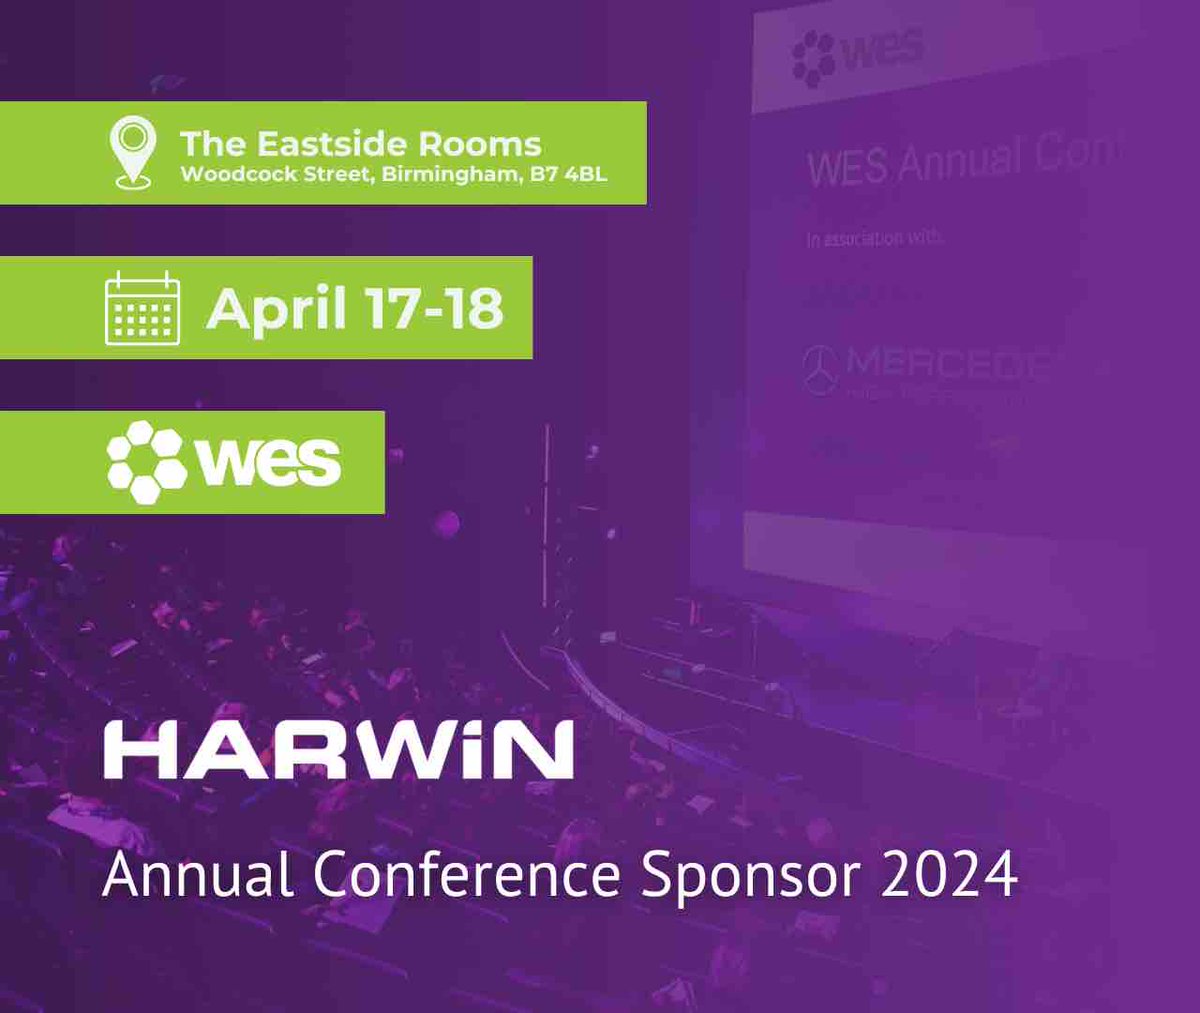 We are delighted that our partner Harwin is one of our 2024 Annual Conference sponsors! And with only 2 days to go we can't wait to join them in Birmingham along with out other generous sponsors! Read more about Harwin: ow.ly/Xmi150RfOlF #WES #WESAnnualConference #Sponsor